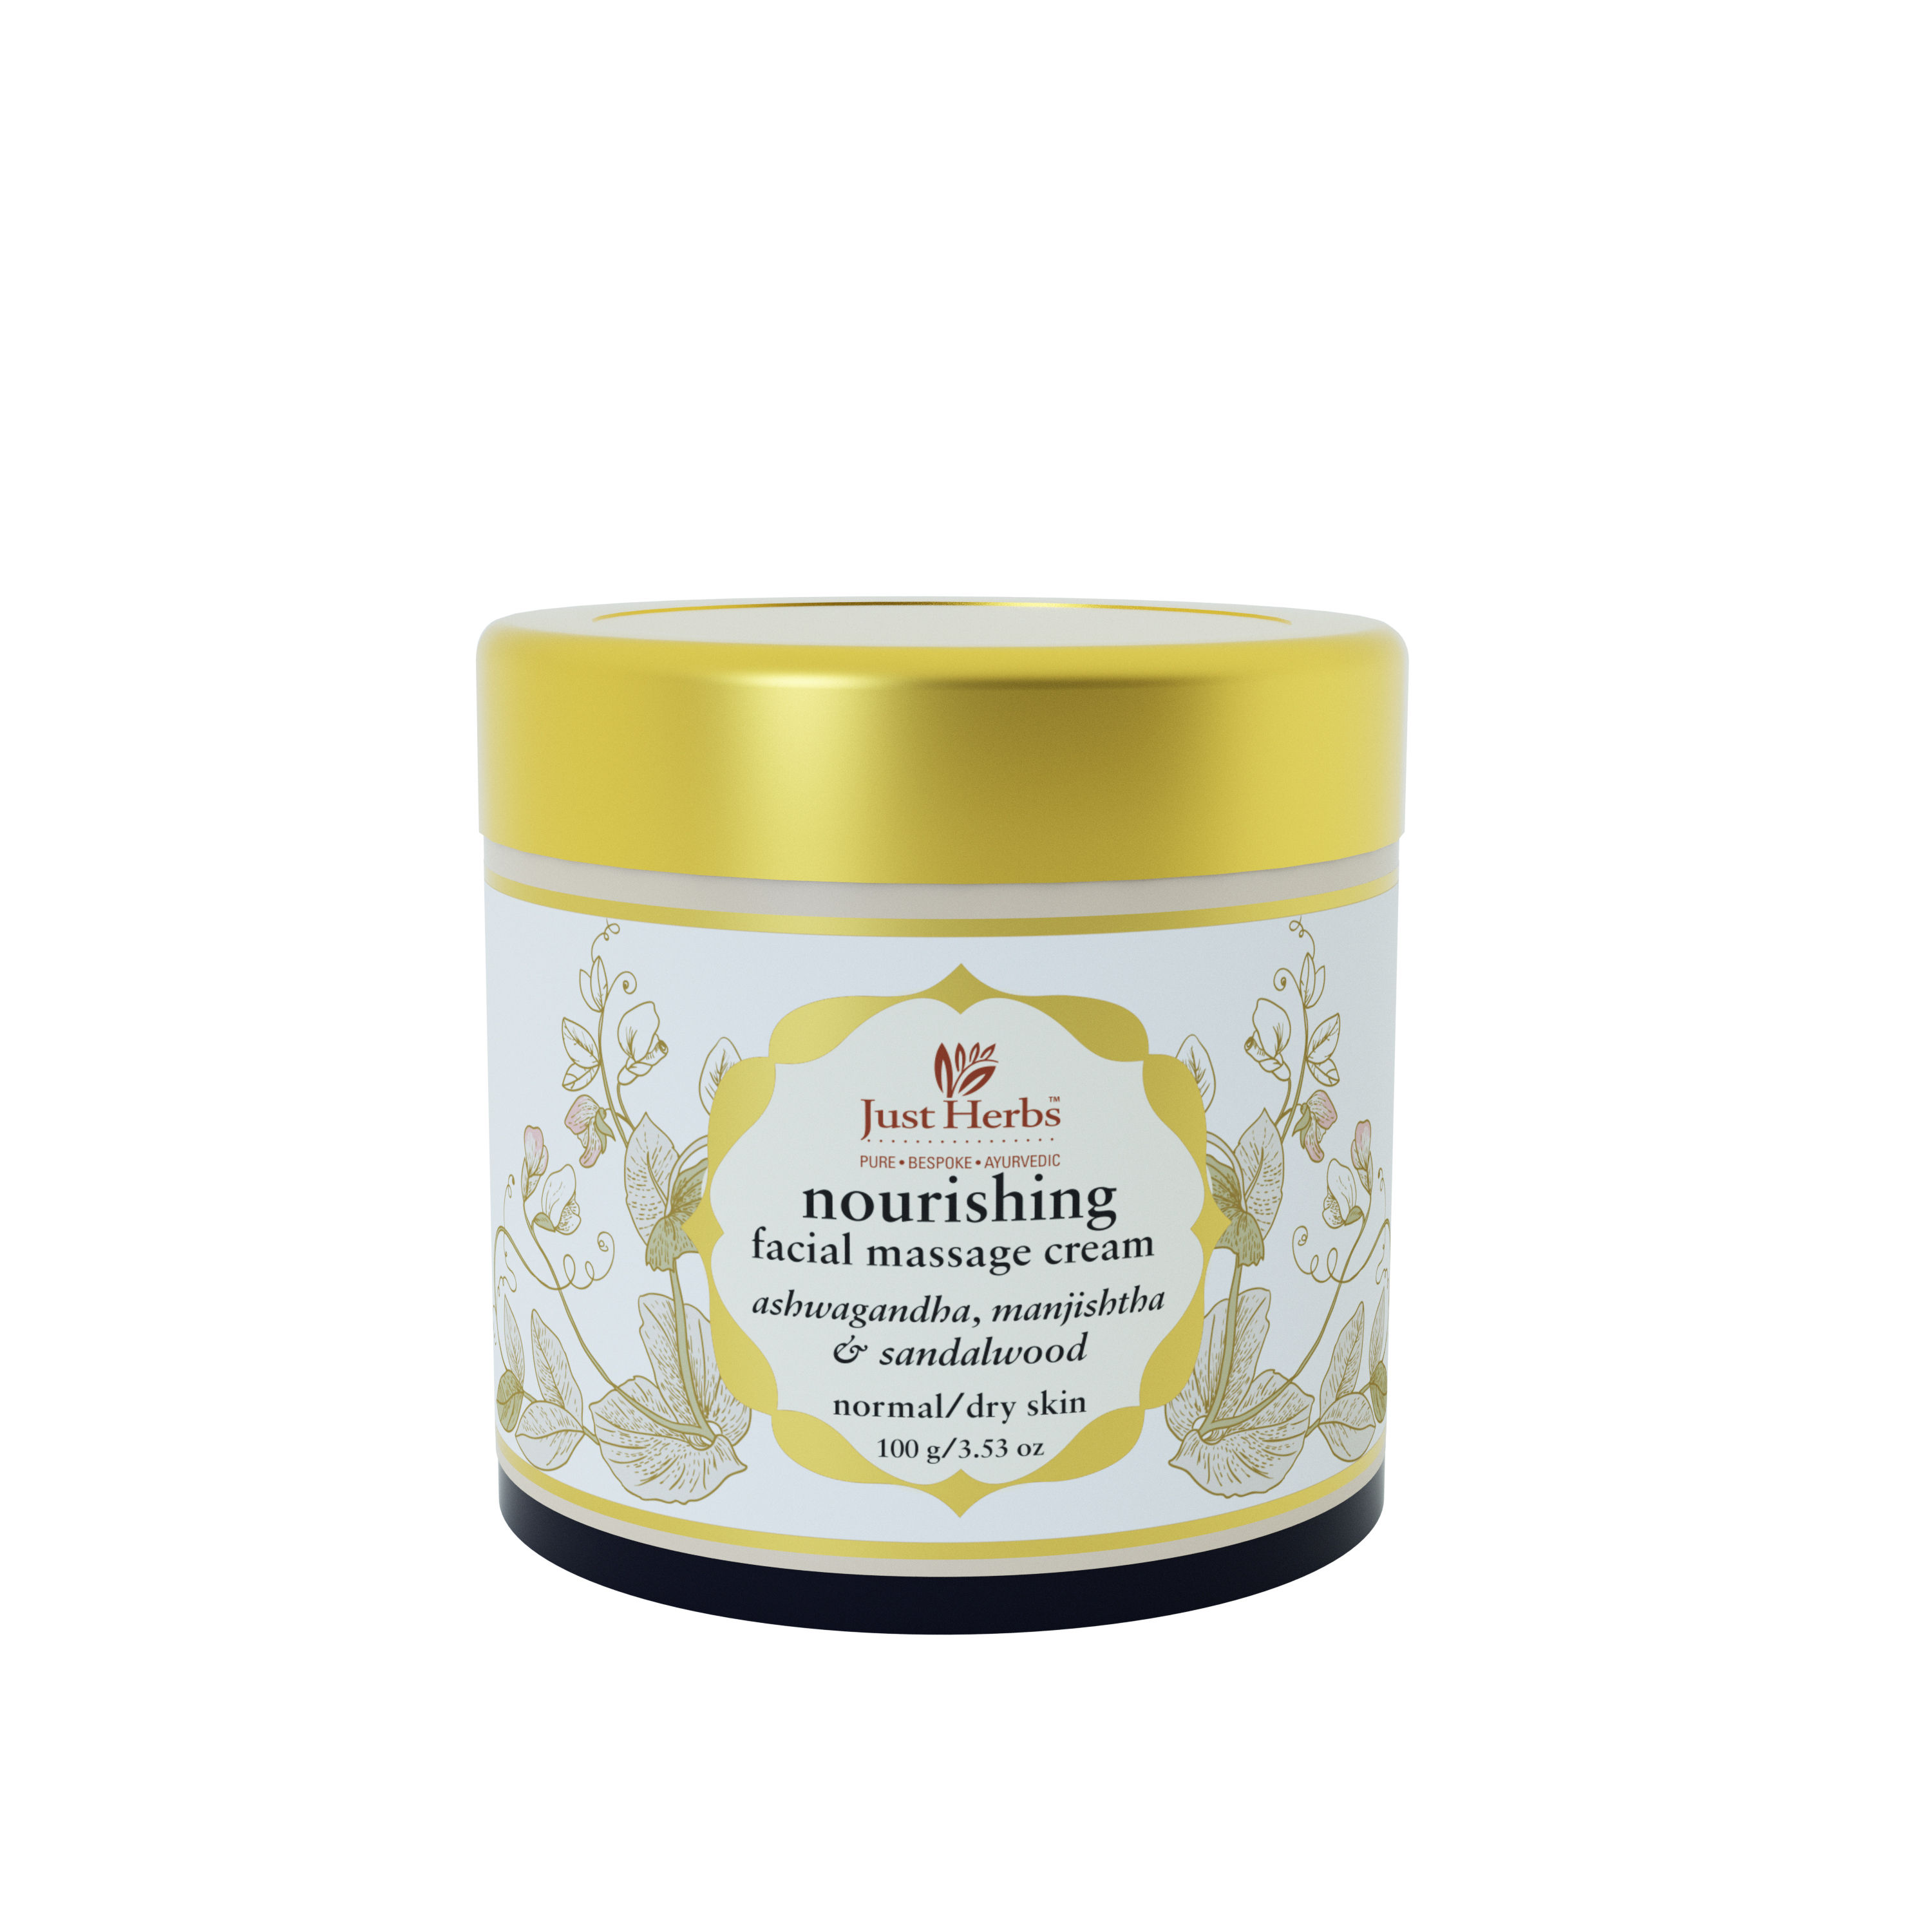 Just Herbs Nourishing Facial Massage Cream for Normal & Dry Skin